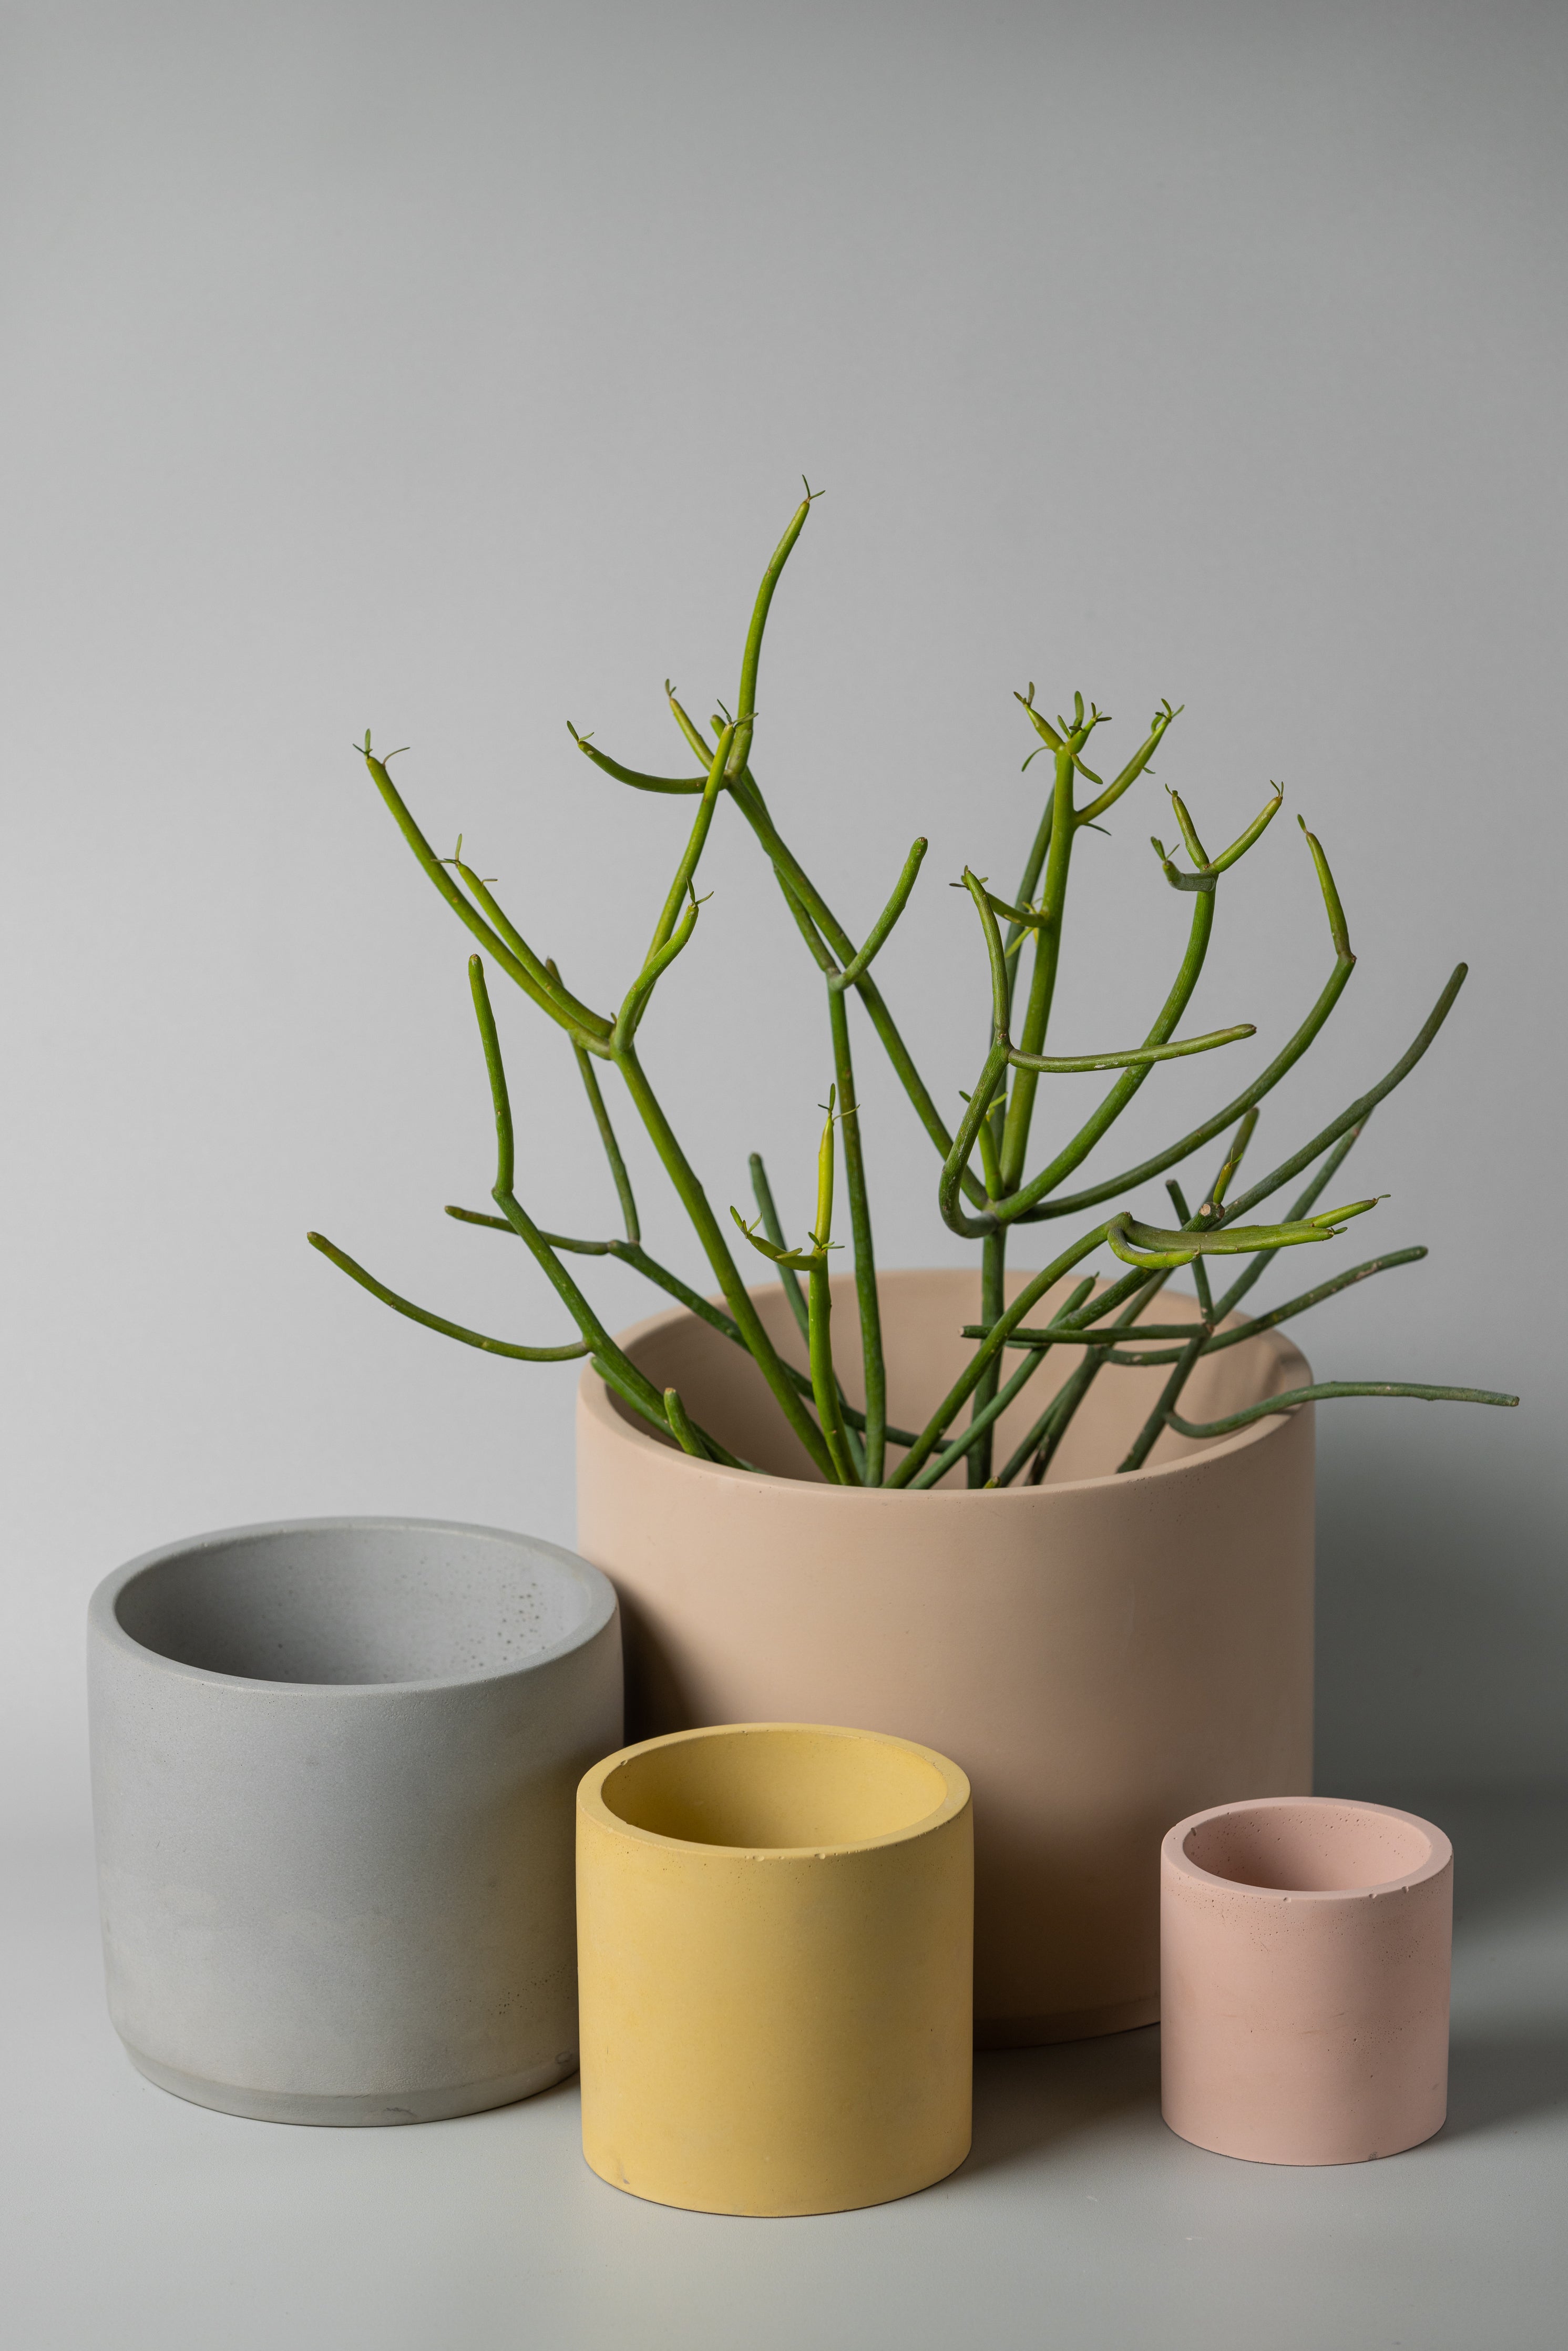 group of all sized cylinder planters for size reference